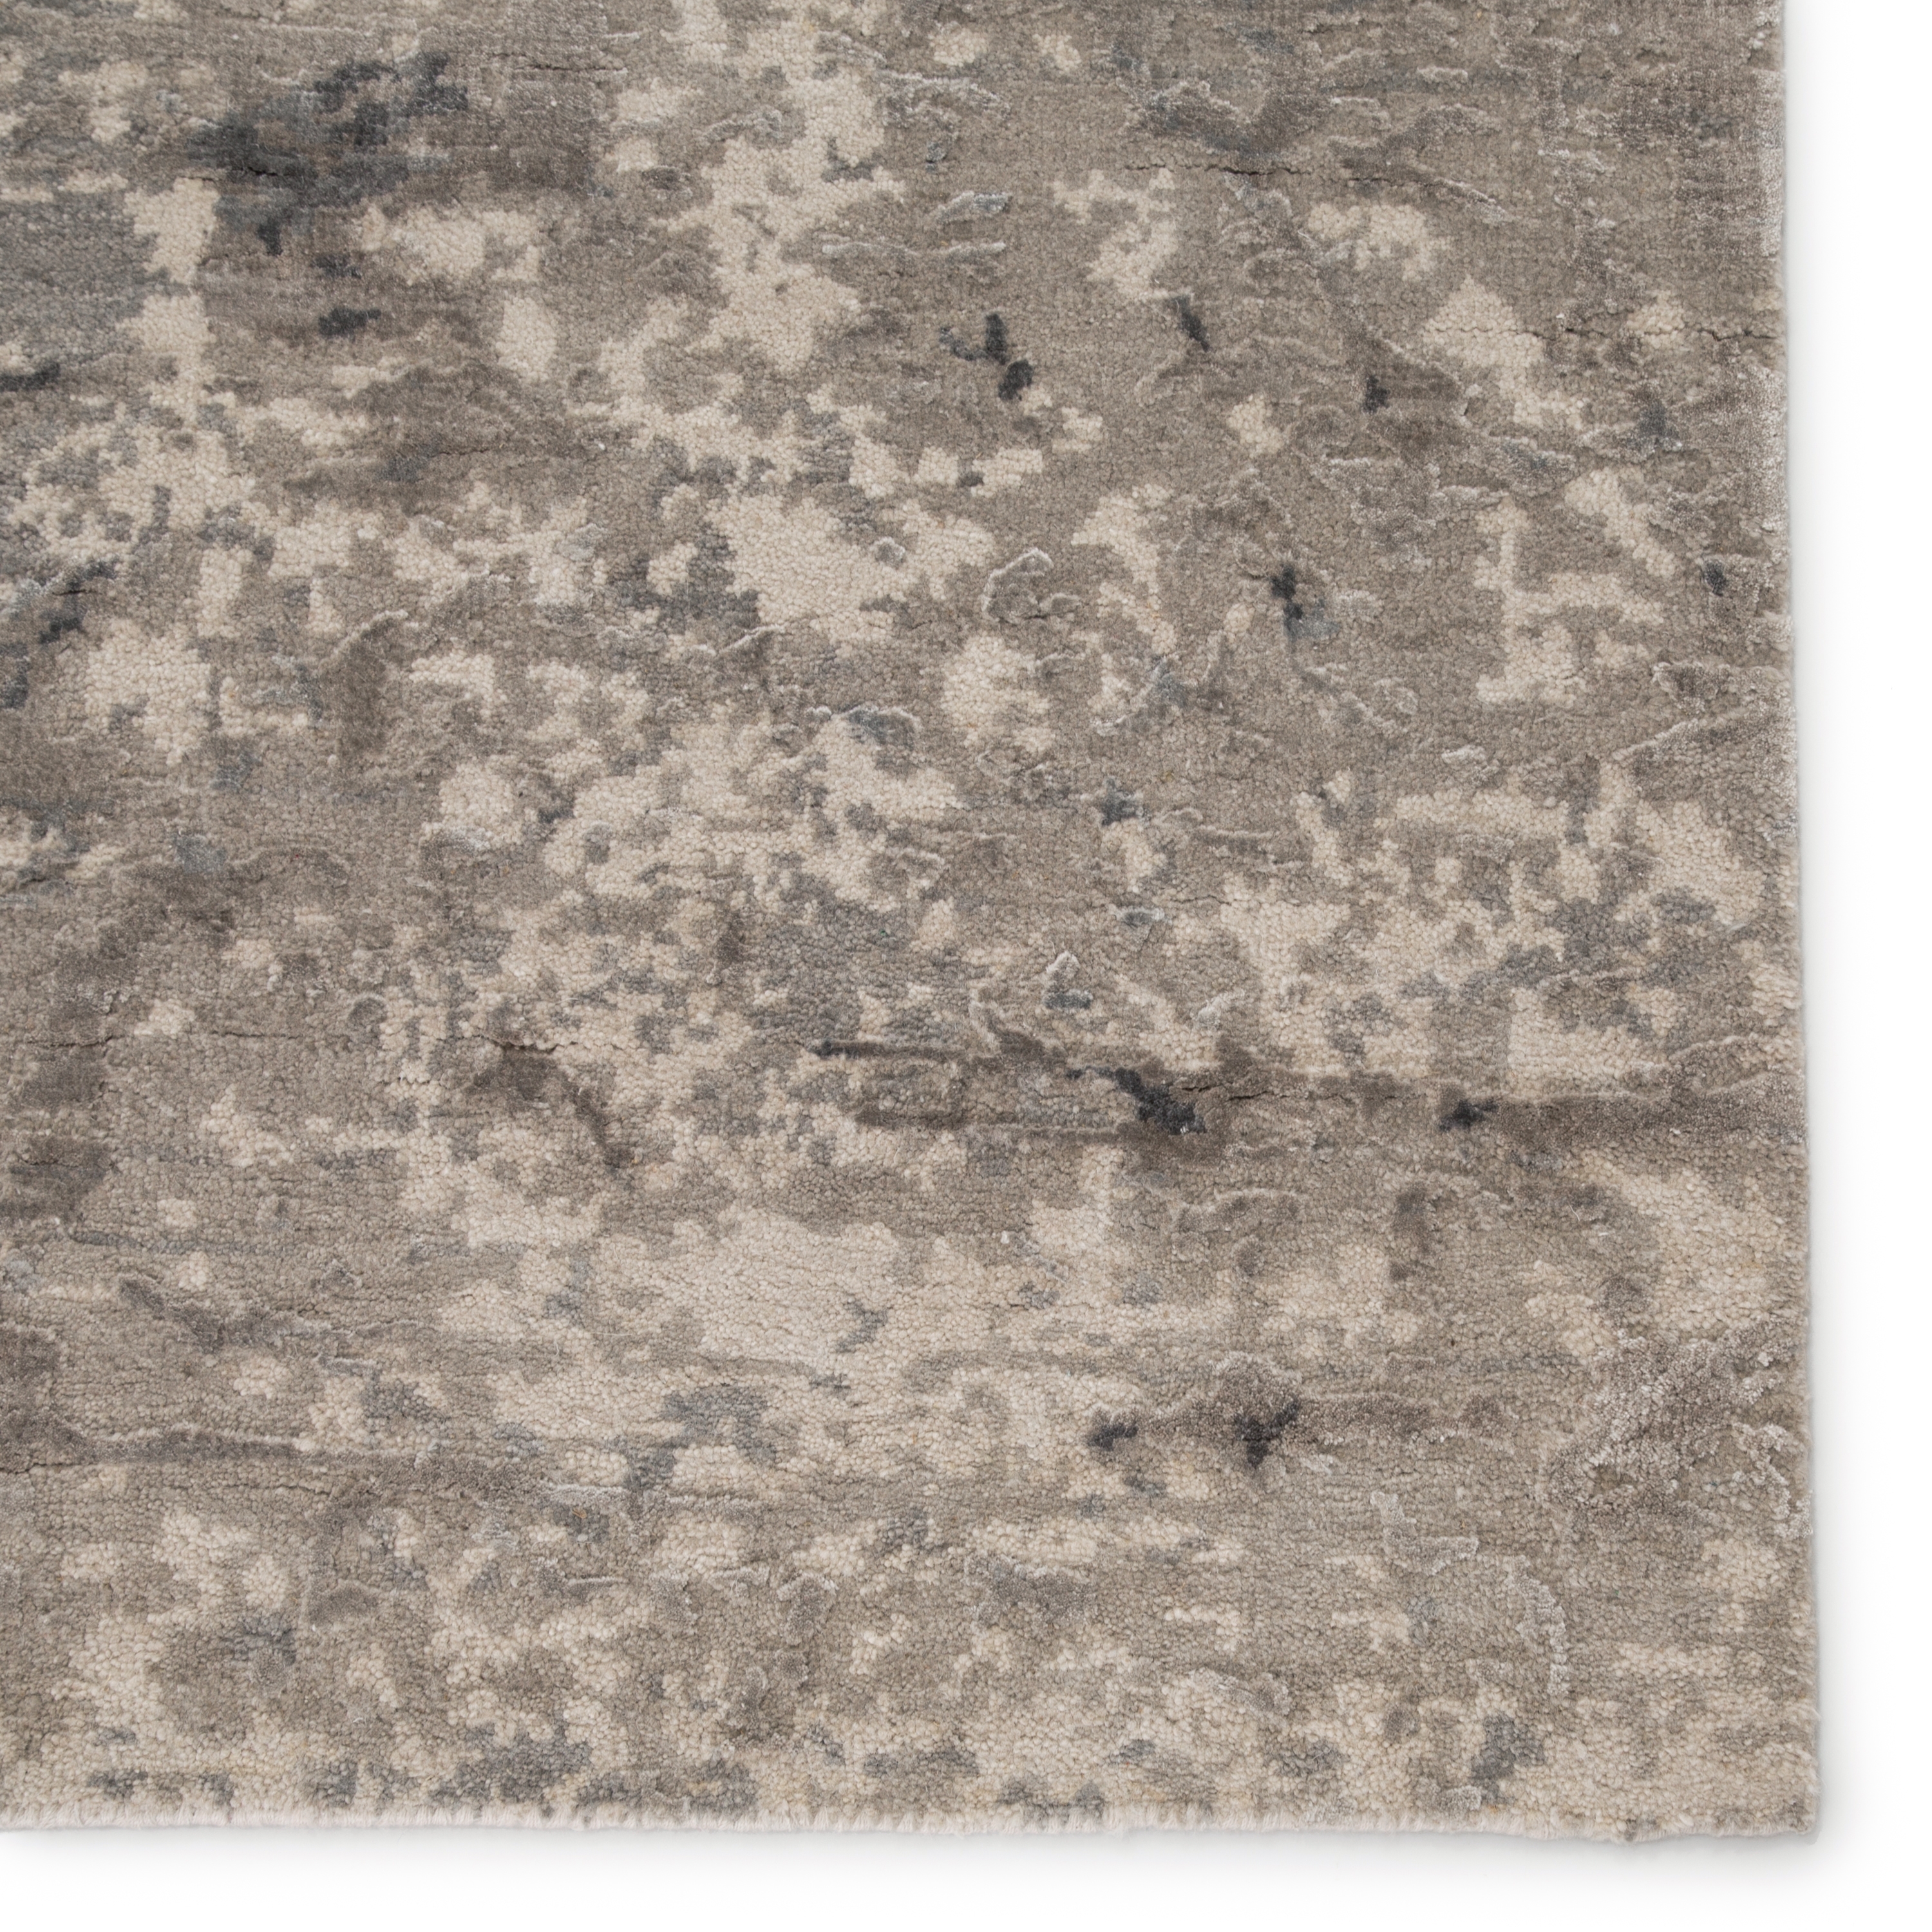 Kavi by Tagada Hand-Knotted Abstract Gray/ Beige Area Rug (10'X14') - Image 3